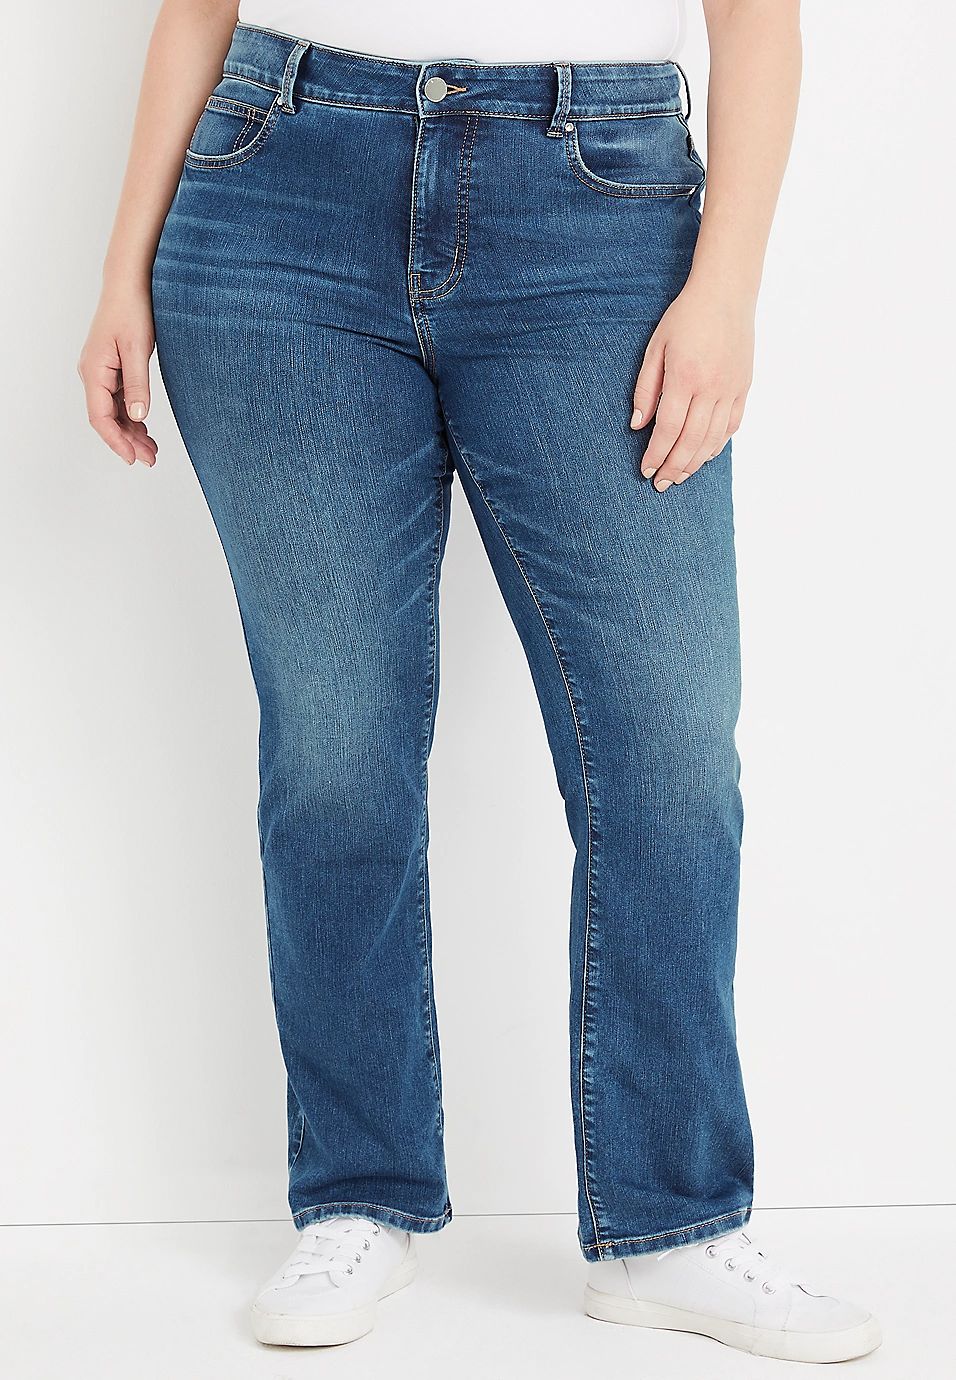 Plus Size m jeans by maurices™ Everflex™ Slim Boot Curvy High Rise Jean | Maurices